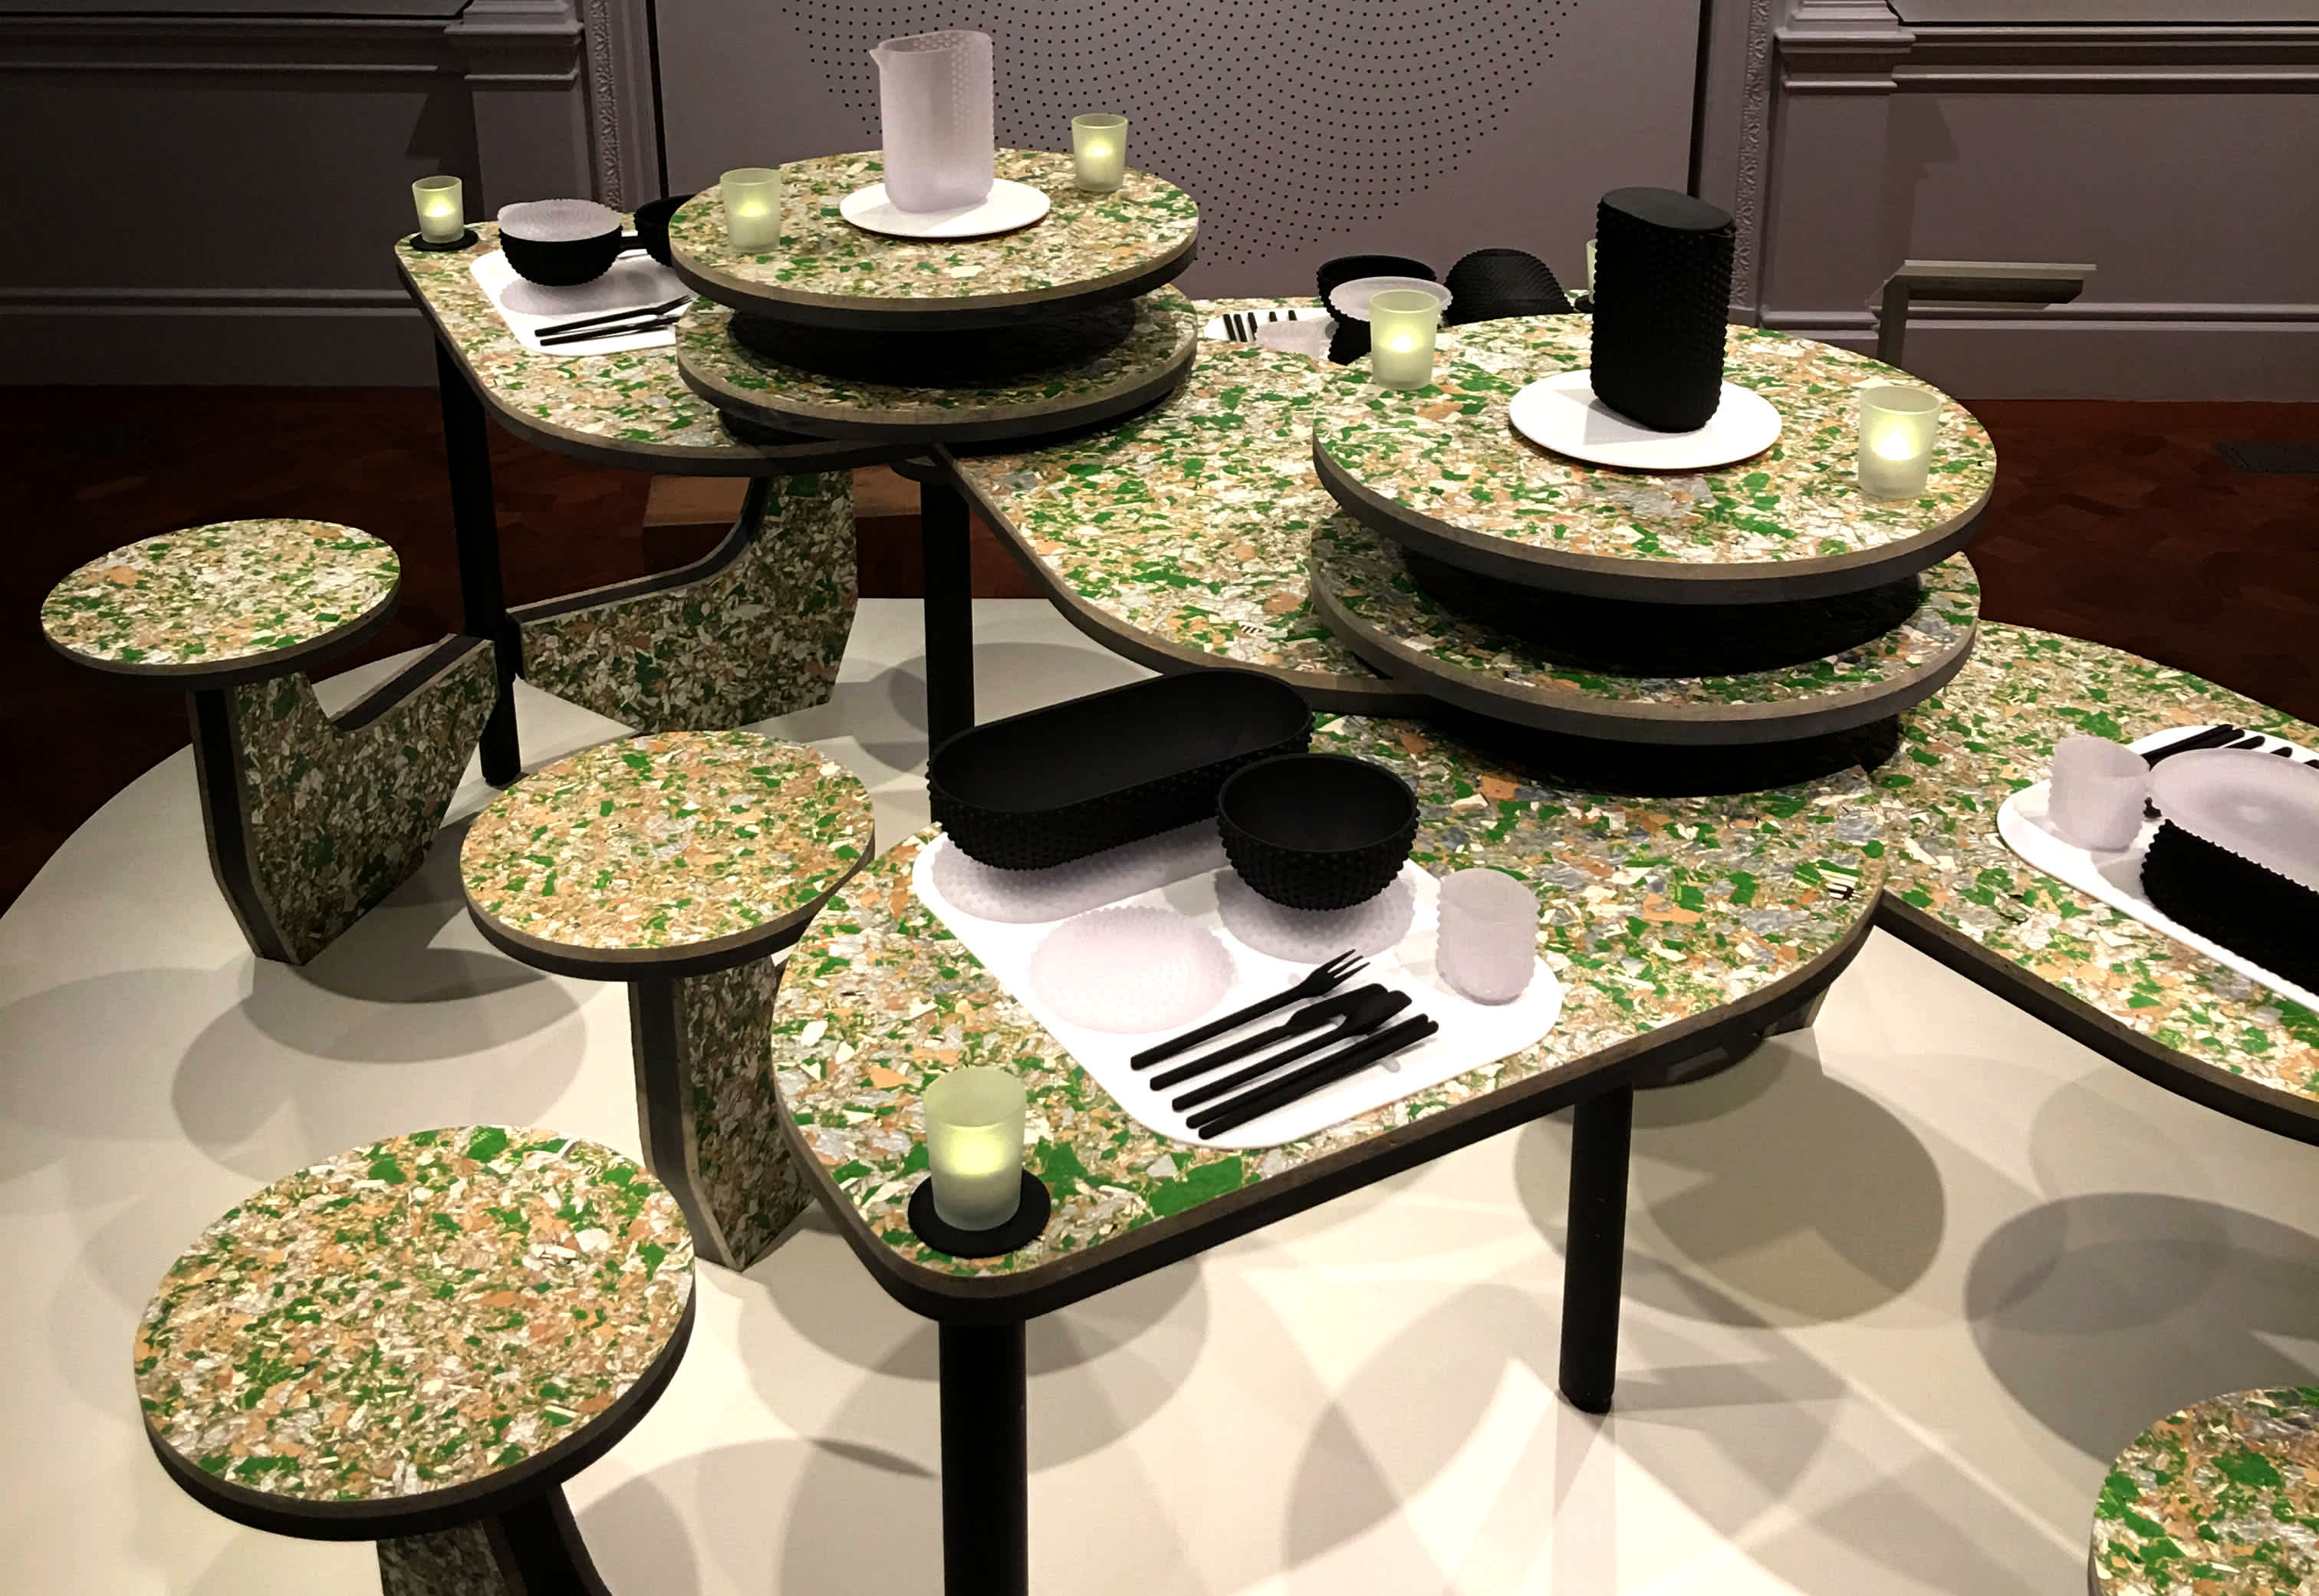 An installation view of Tablescapes designed by Bureau V Architecture with Mary Ping at the Smithsonian Cooper Hewitt Museum in New York, NY.
